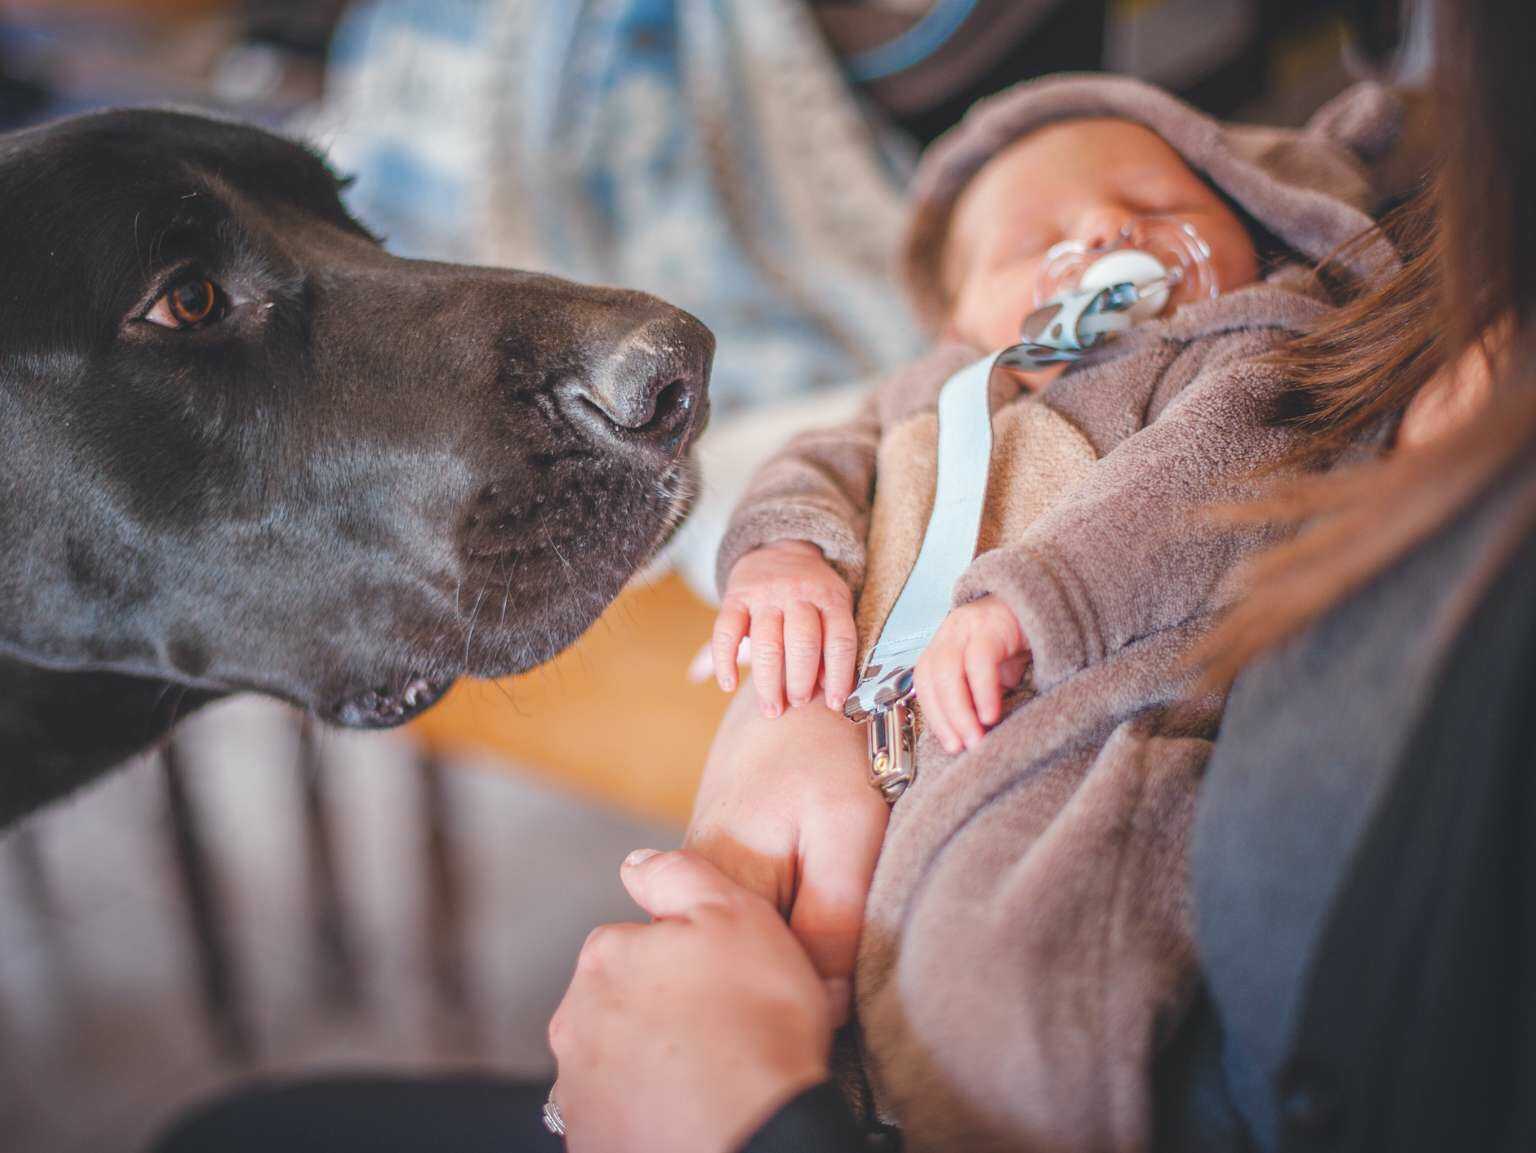 how do you acclimate a dog to a new baby